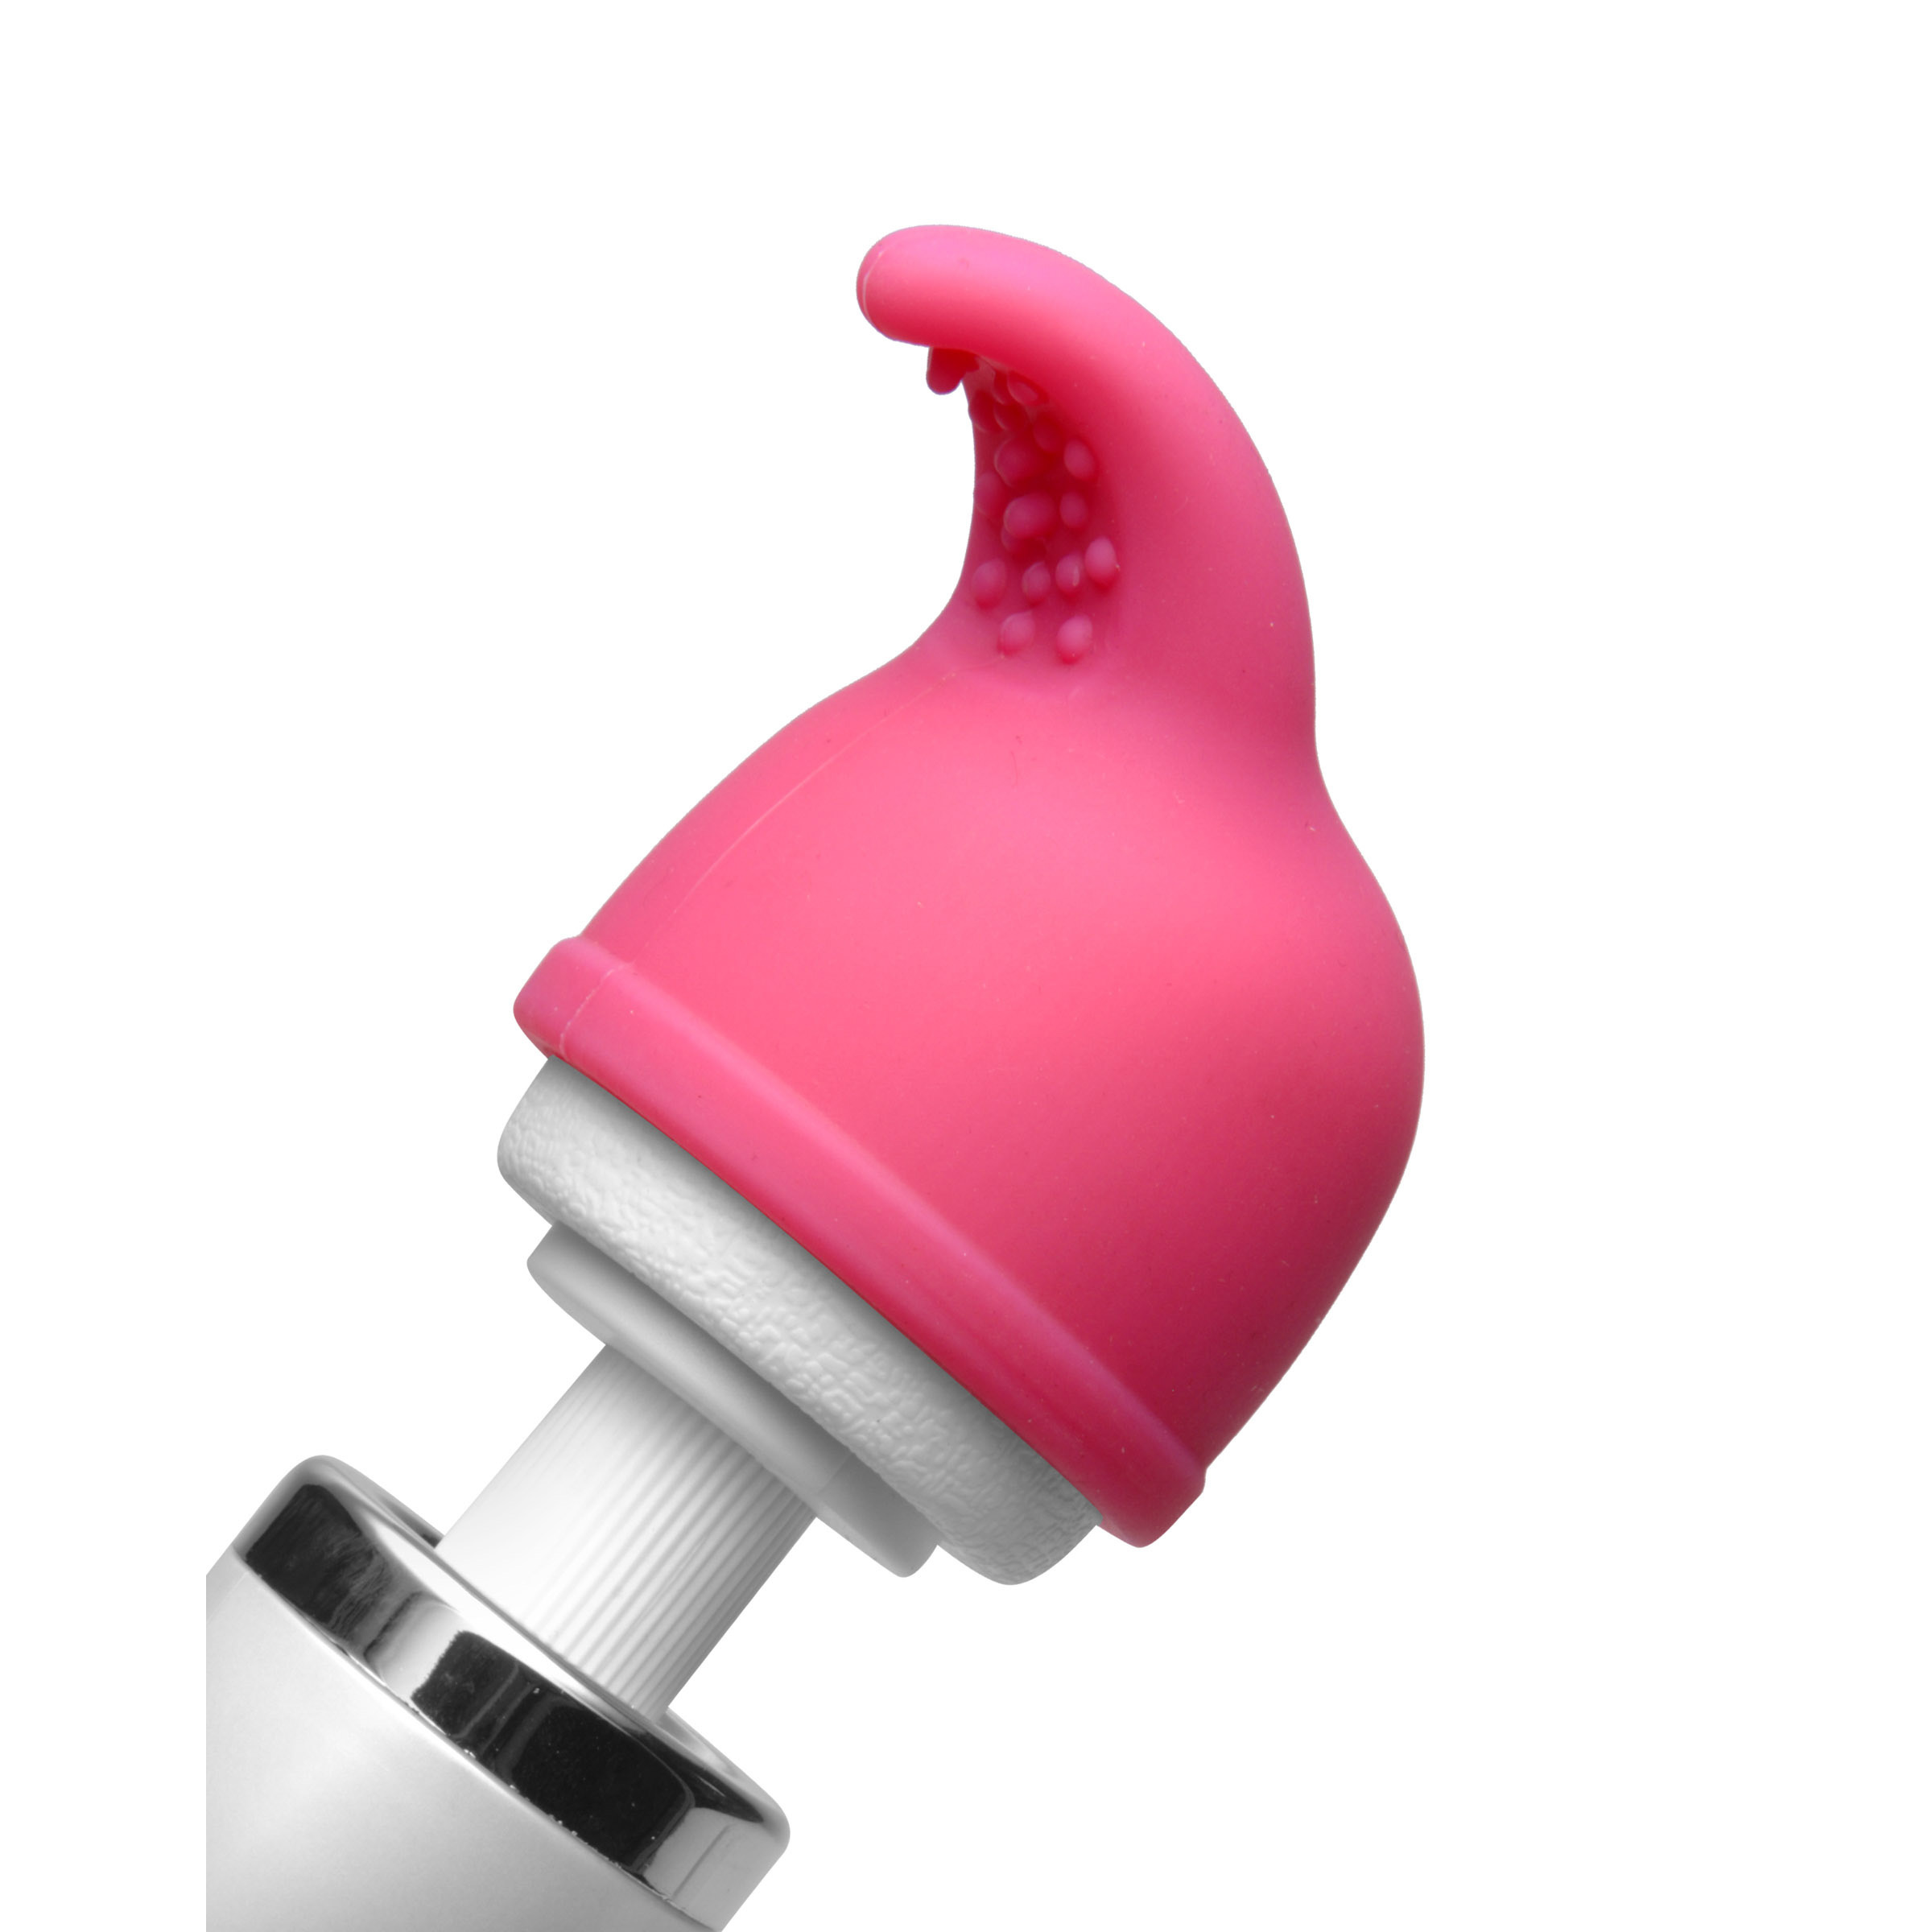 Nuzzle+Tip+Wand+Attachment